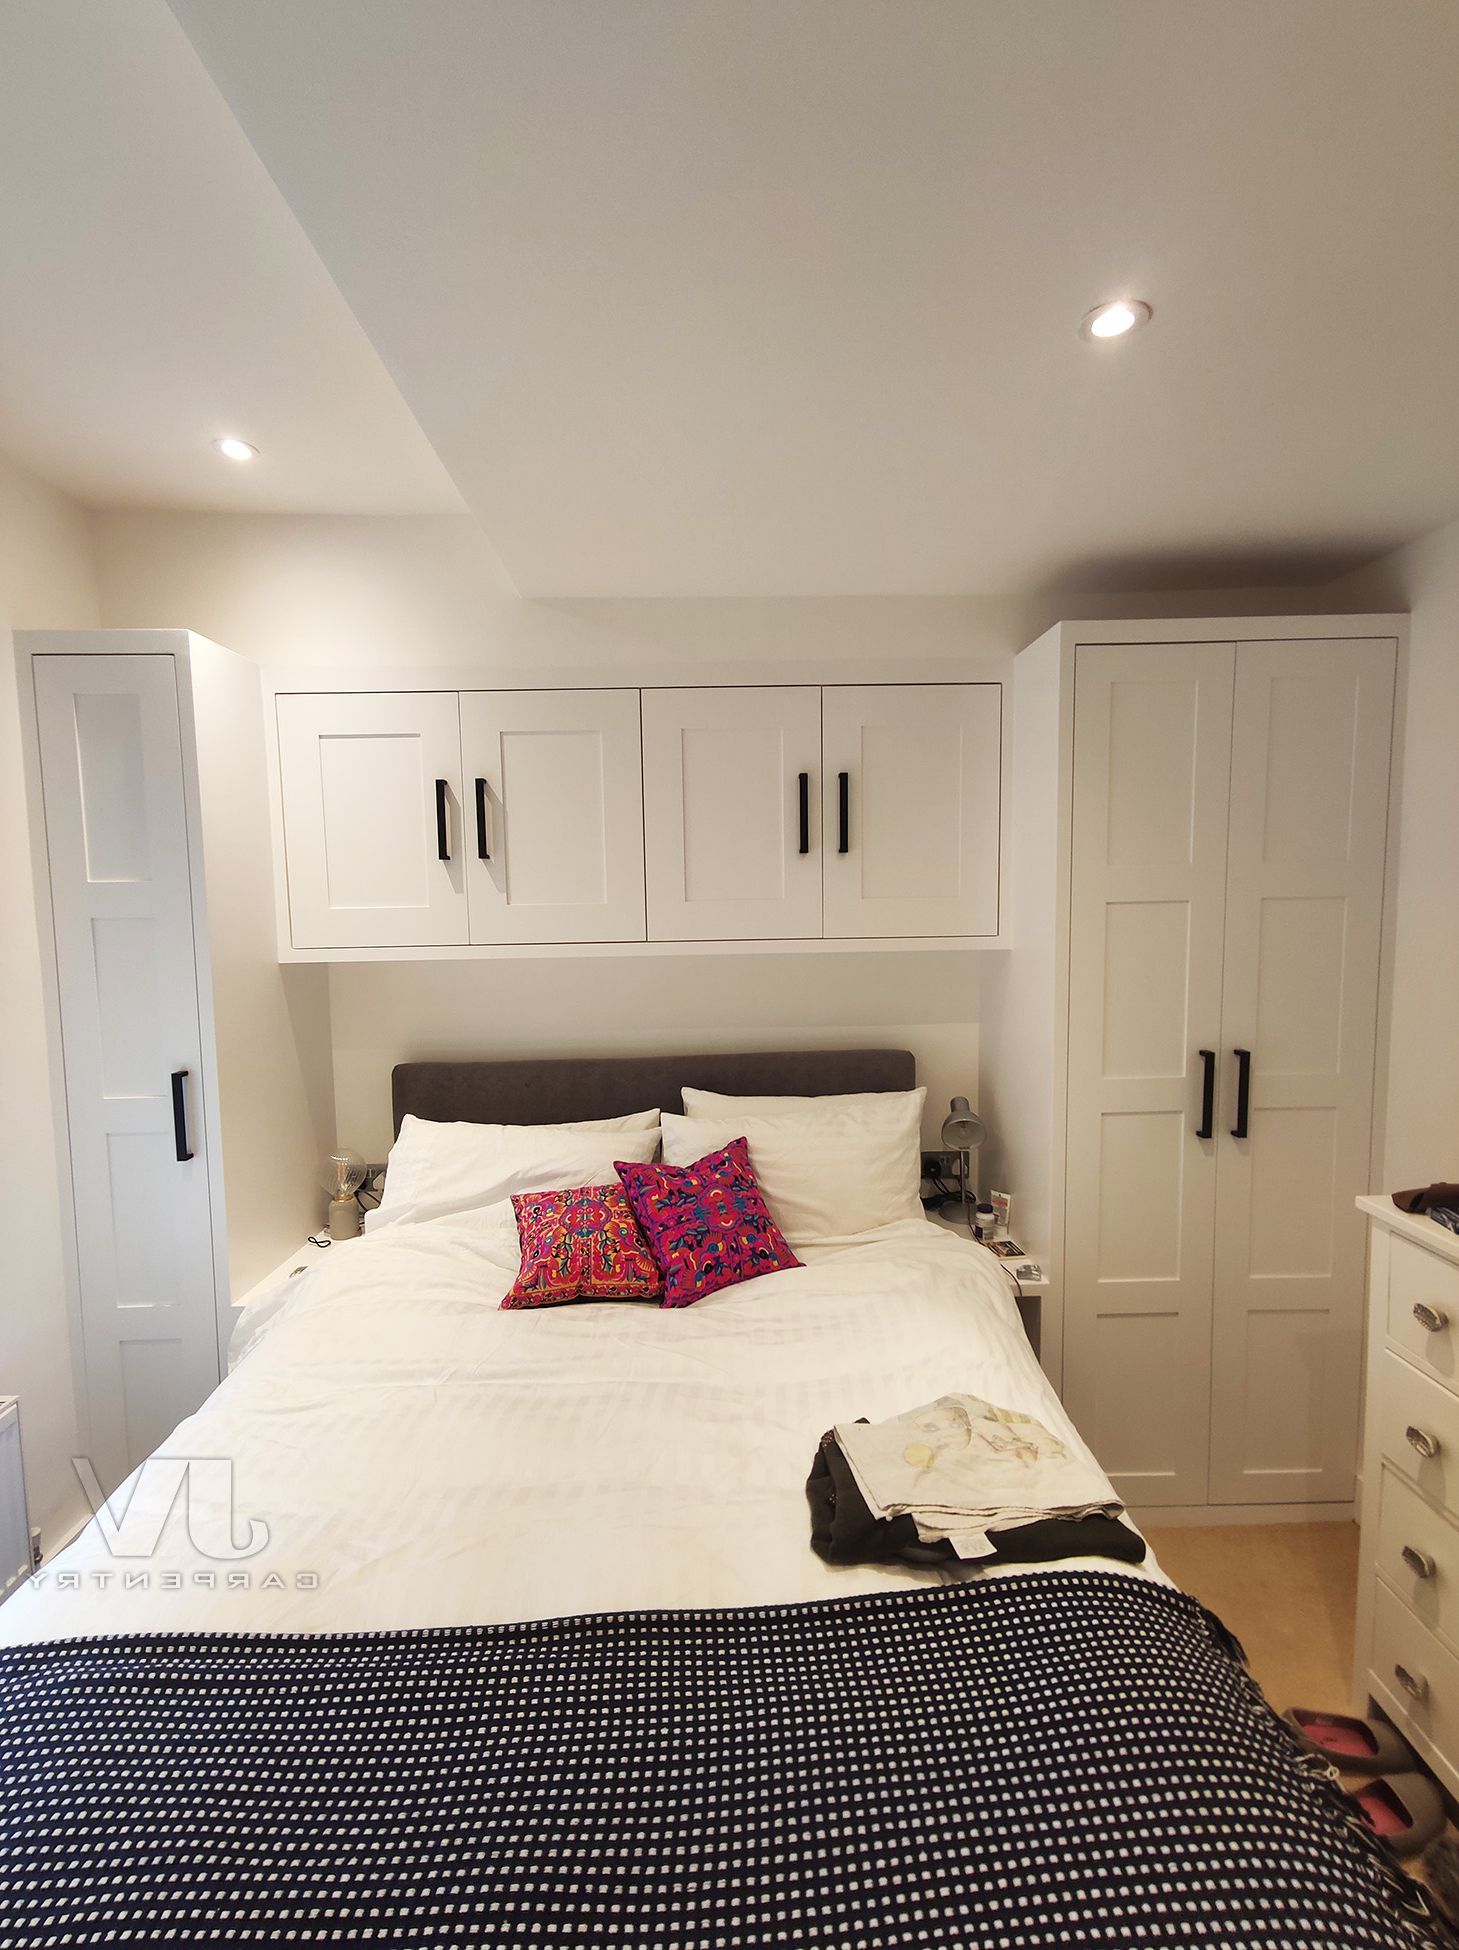 12 Fitted Wardrobes Over Bed Ideas For Your Bedroom | Jv Carpentry Regarding Over Bed Wardrobes Units (View 14 of 20)